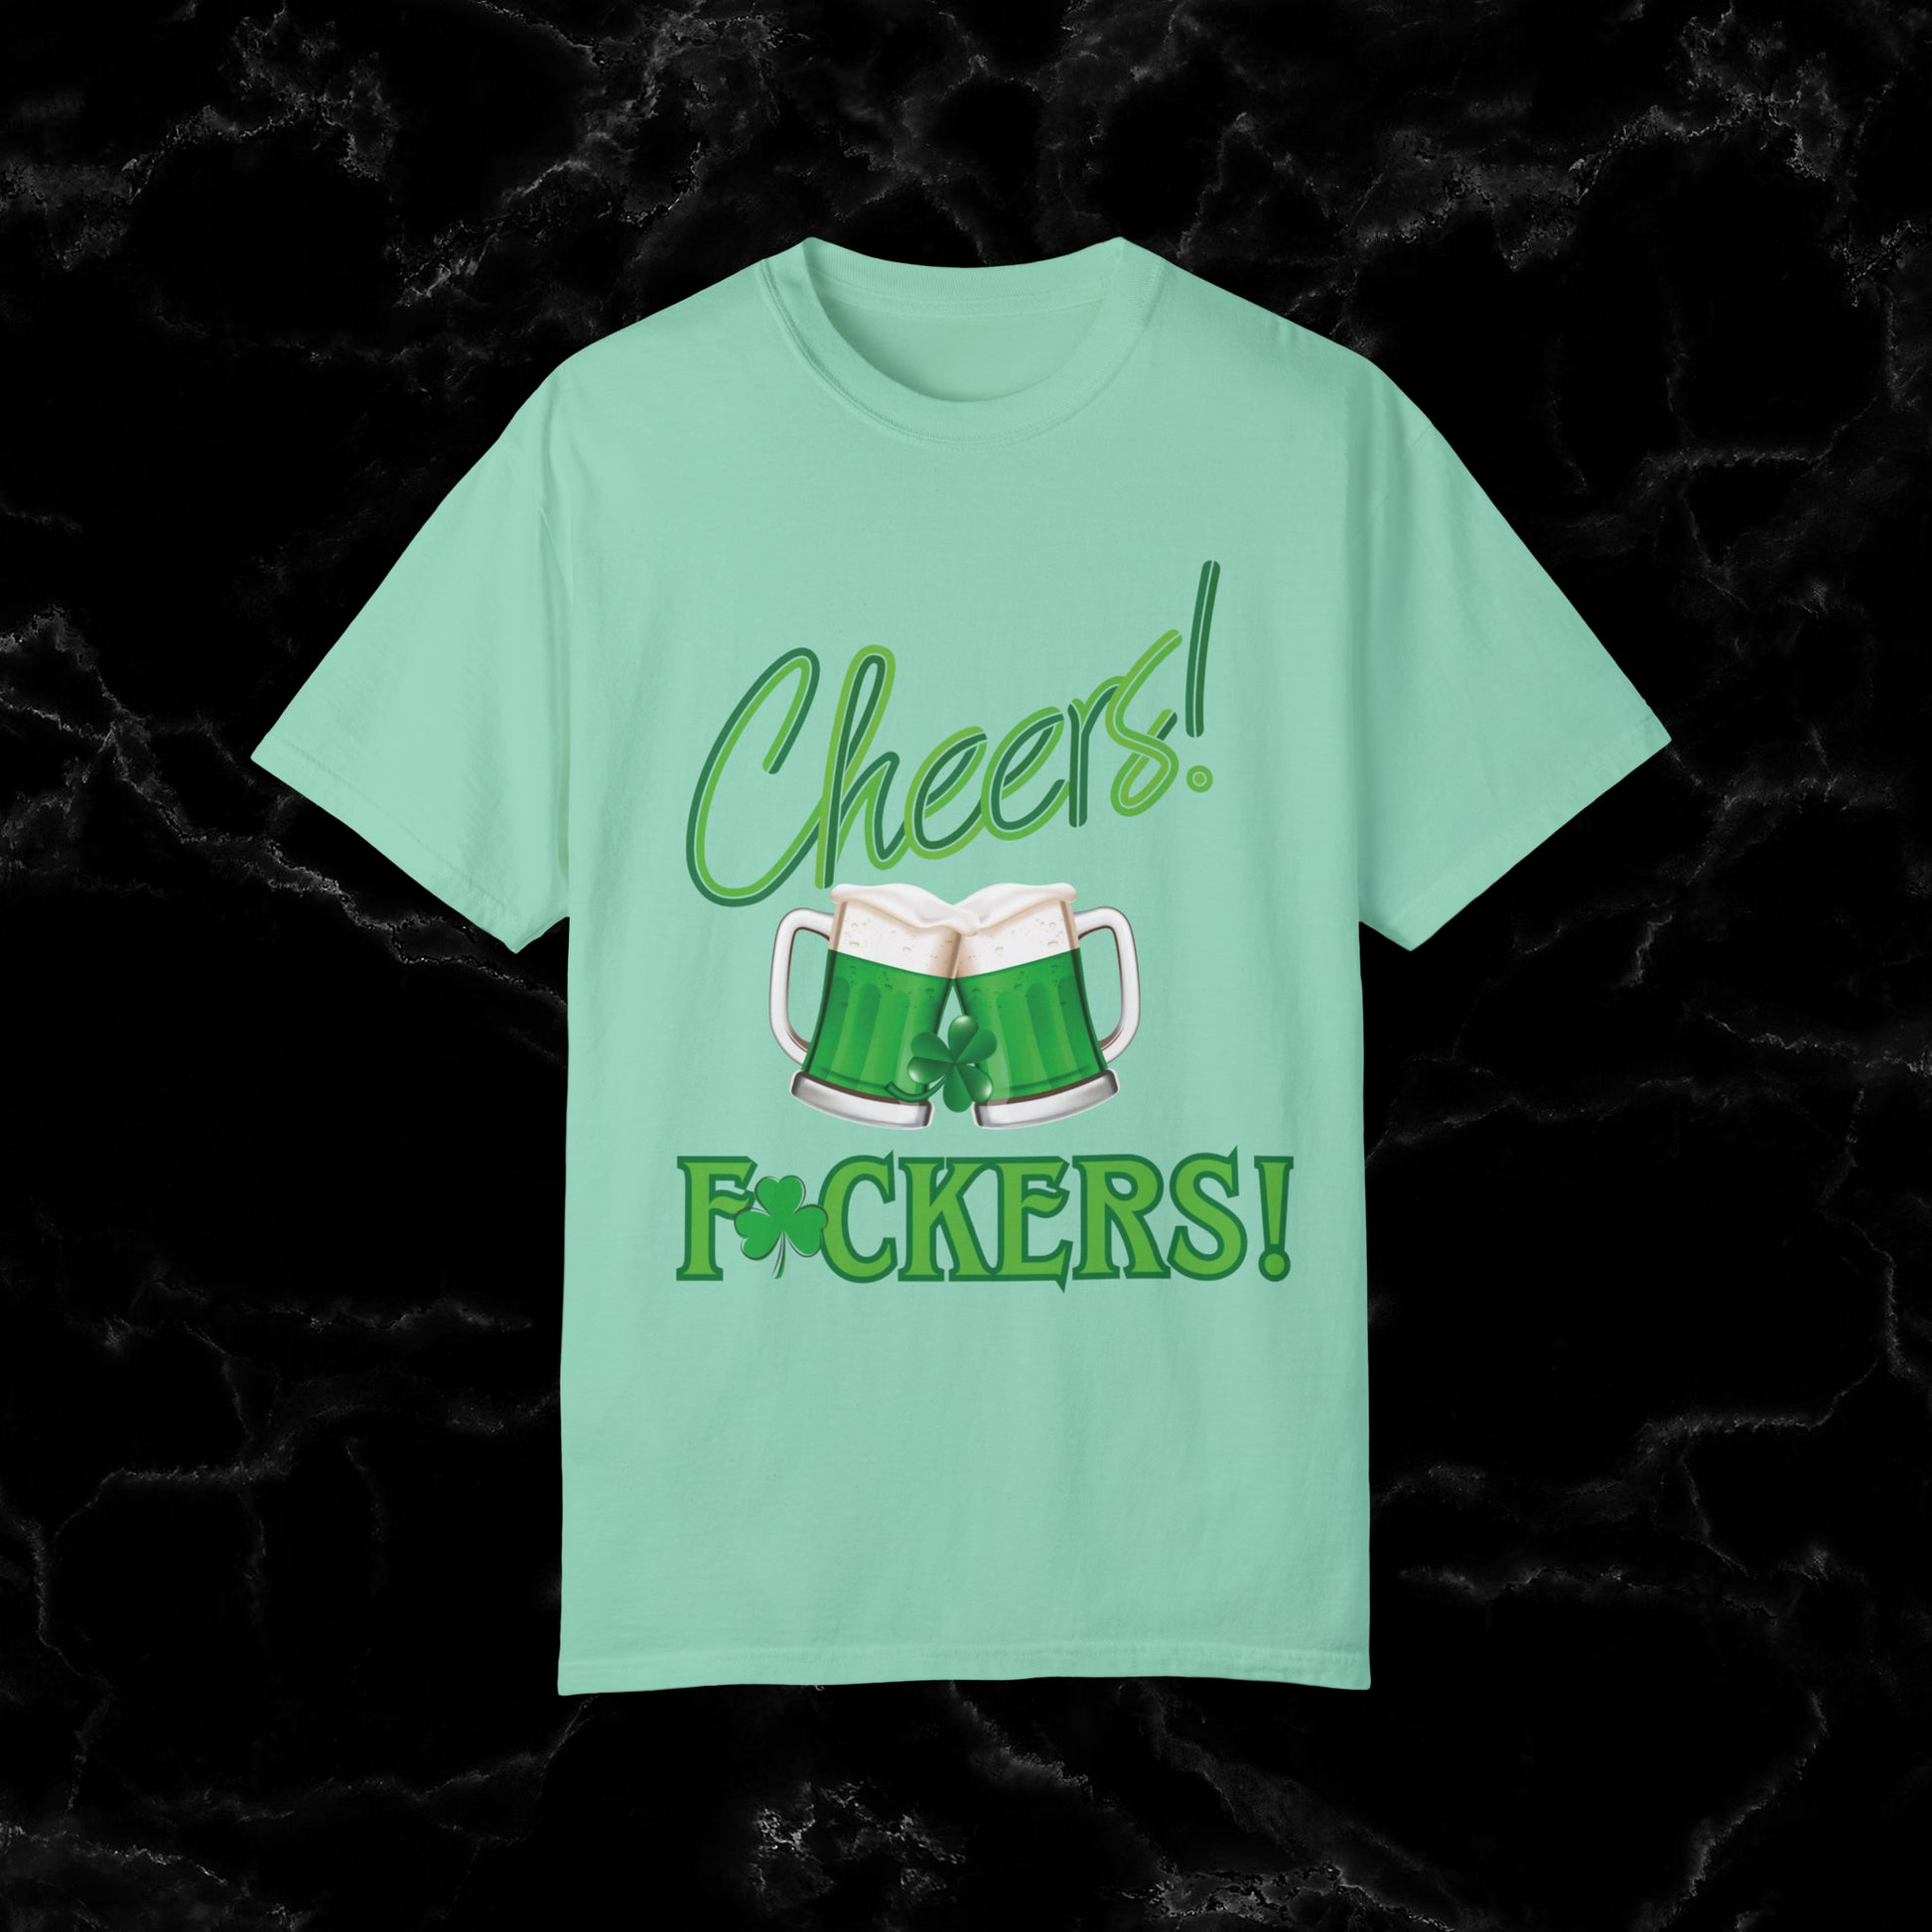 Cheers F**kers Shirt - A Bold Shamrock Statement for Irish Spirits and Good Times T-Shirt Island Reef S 